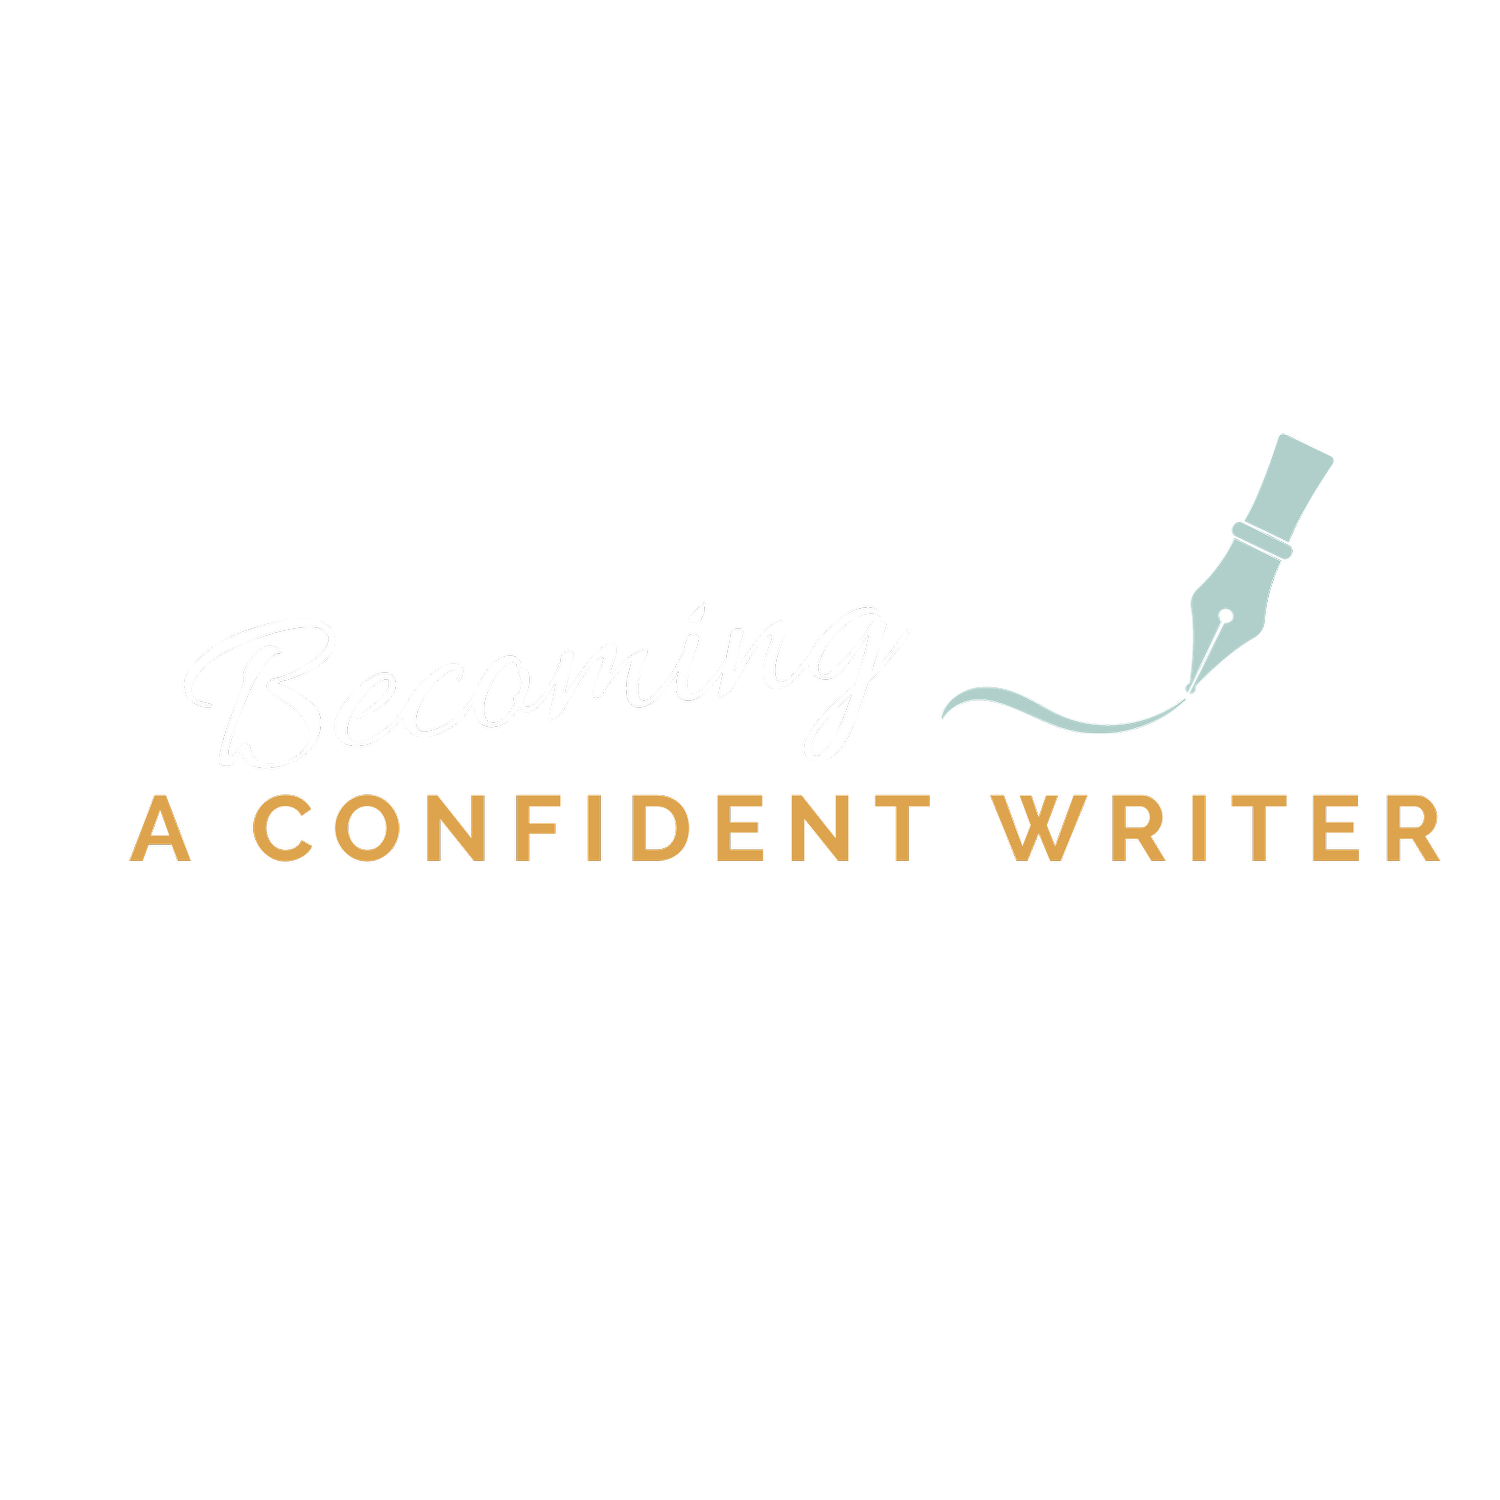 Becoming a Confident Writer